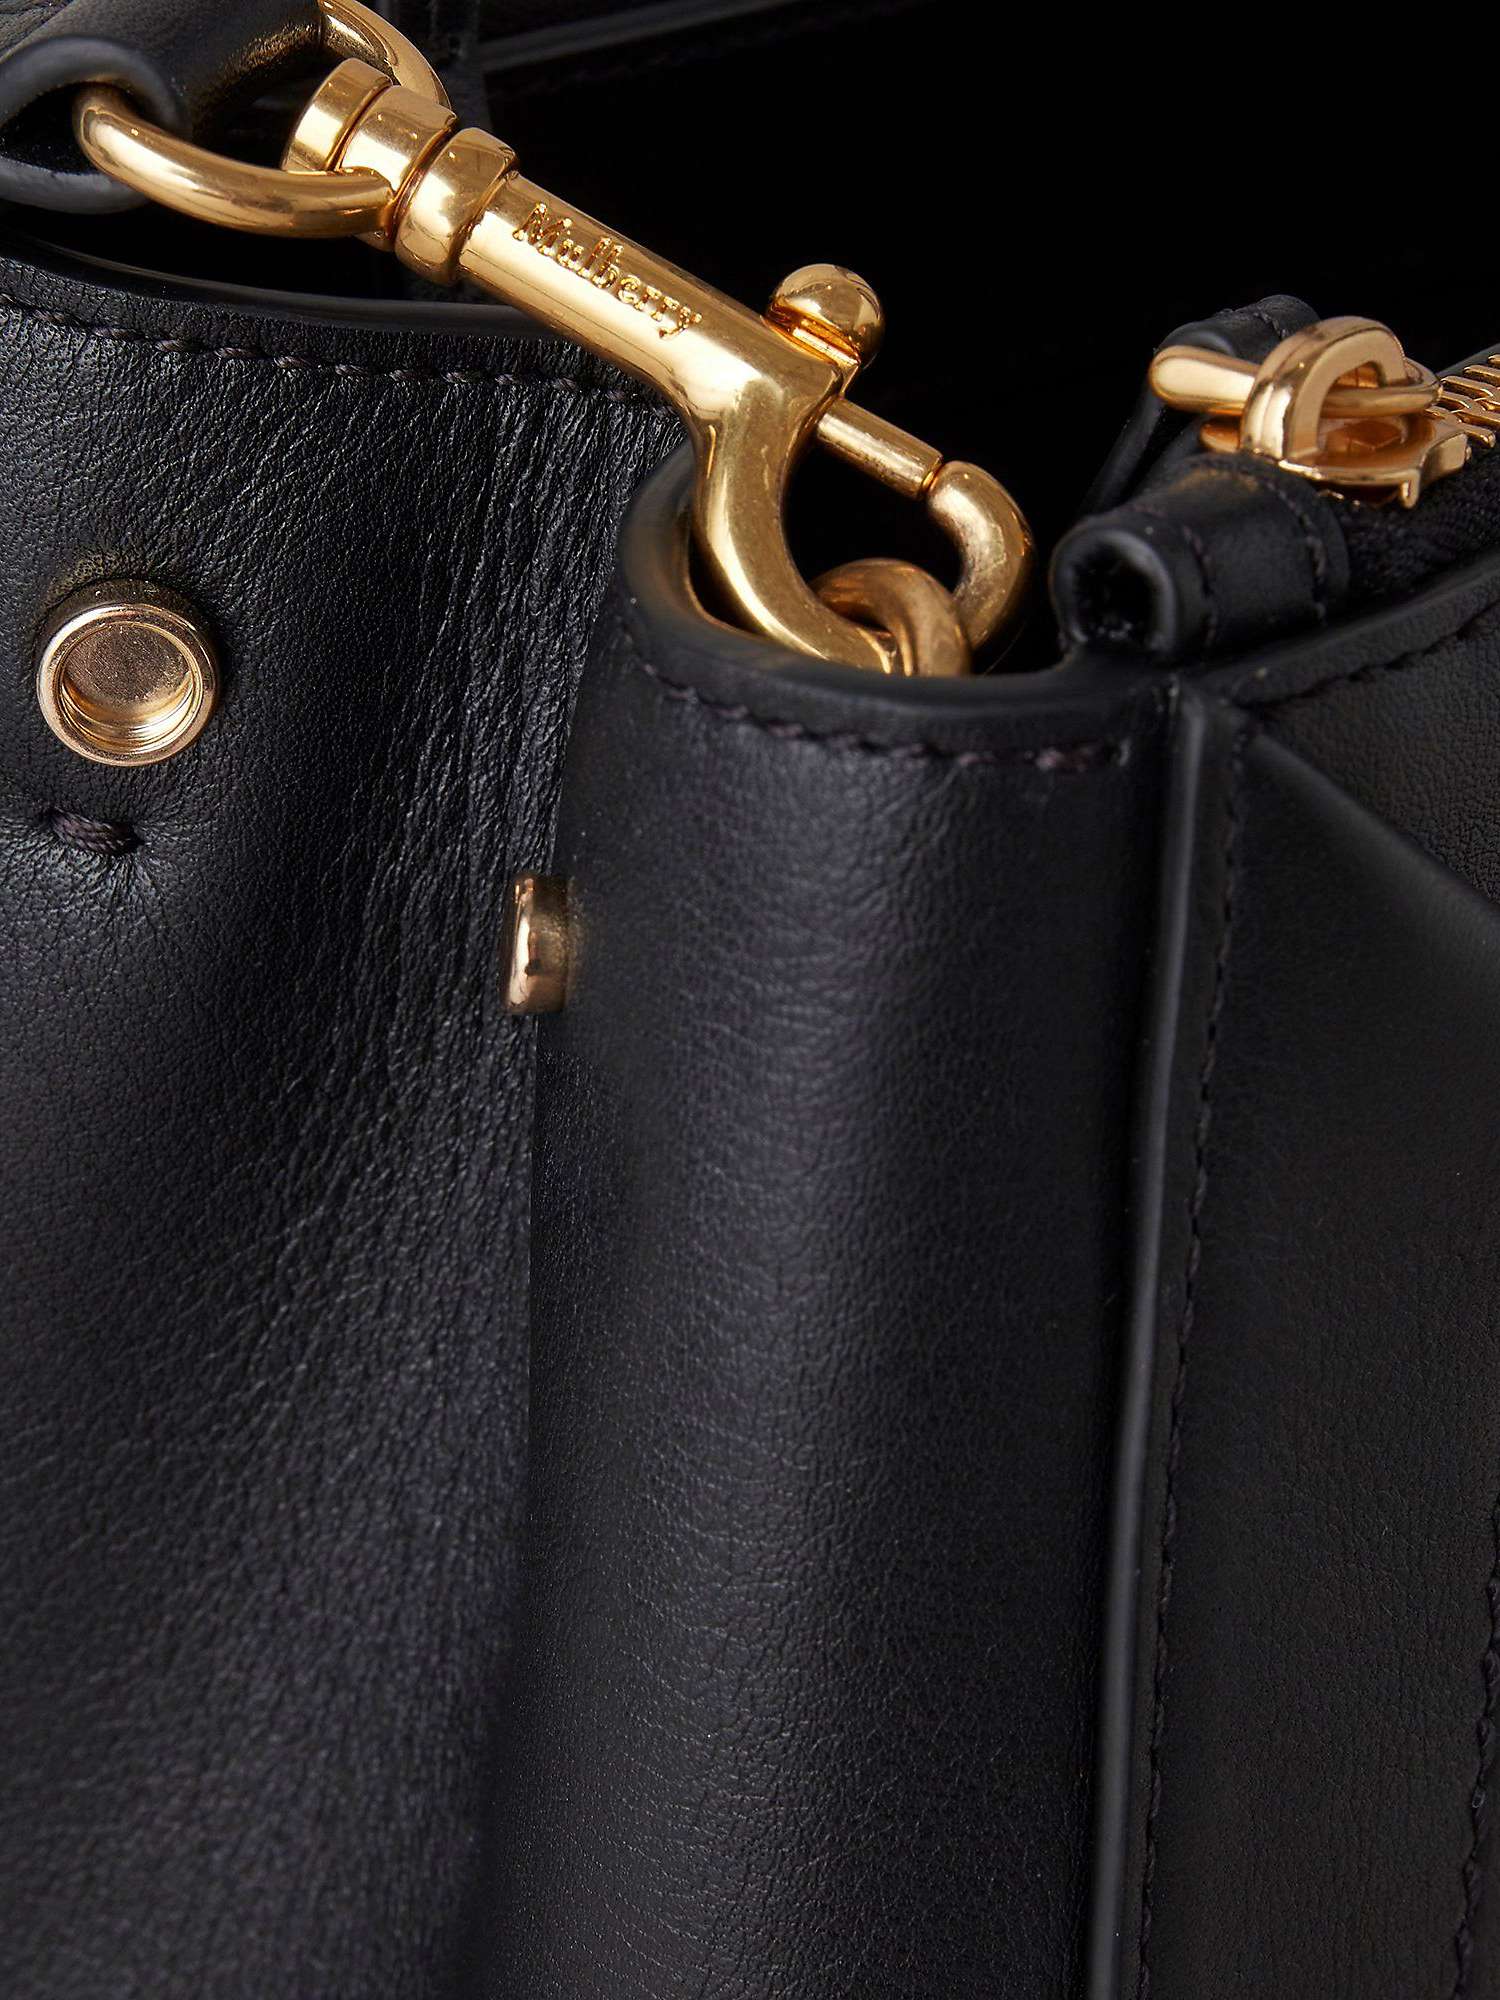 Buy Mulberry M Zipped Micro Classic Grain Leather Top Handle Bag, Black Online at johnlewis.com